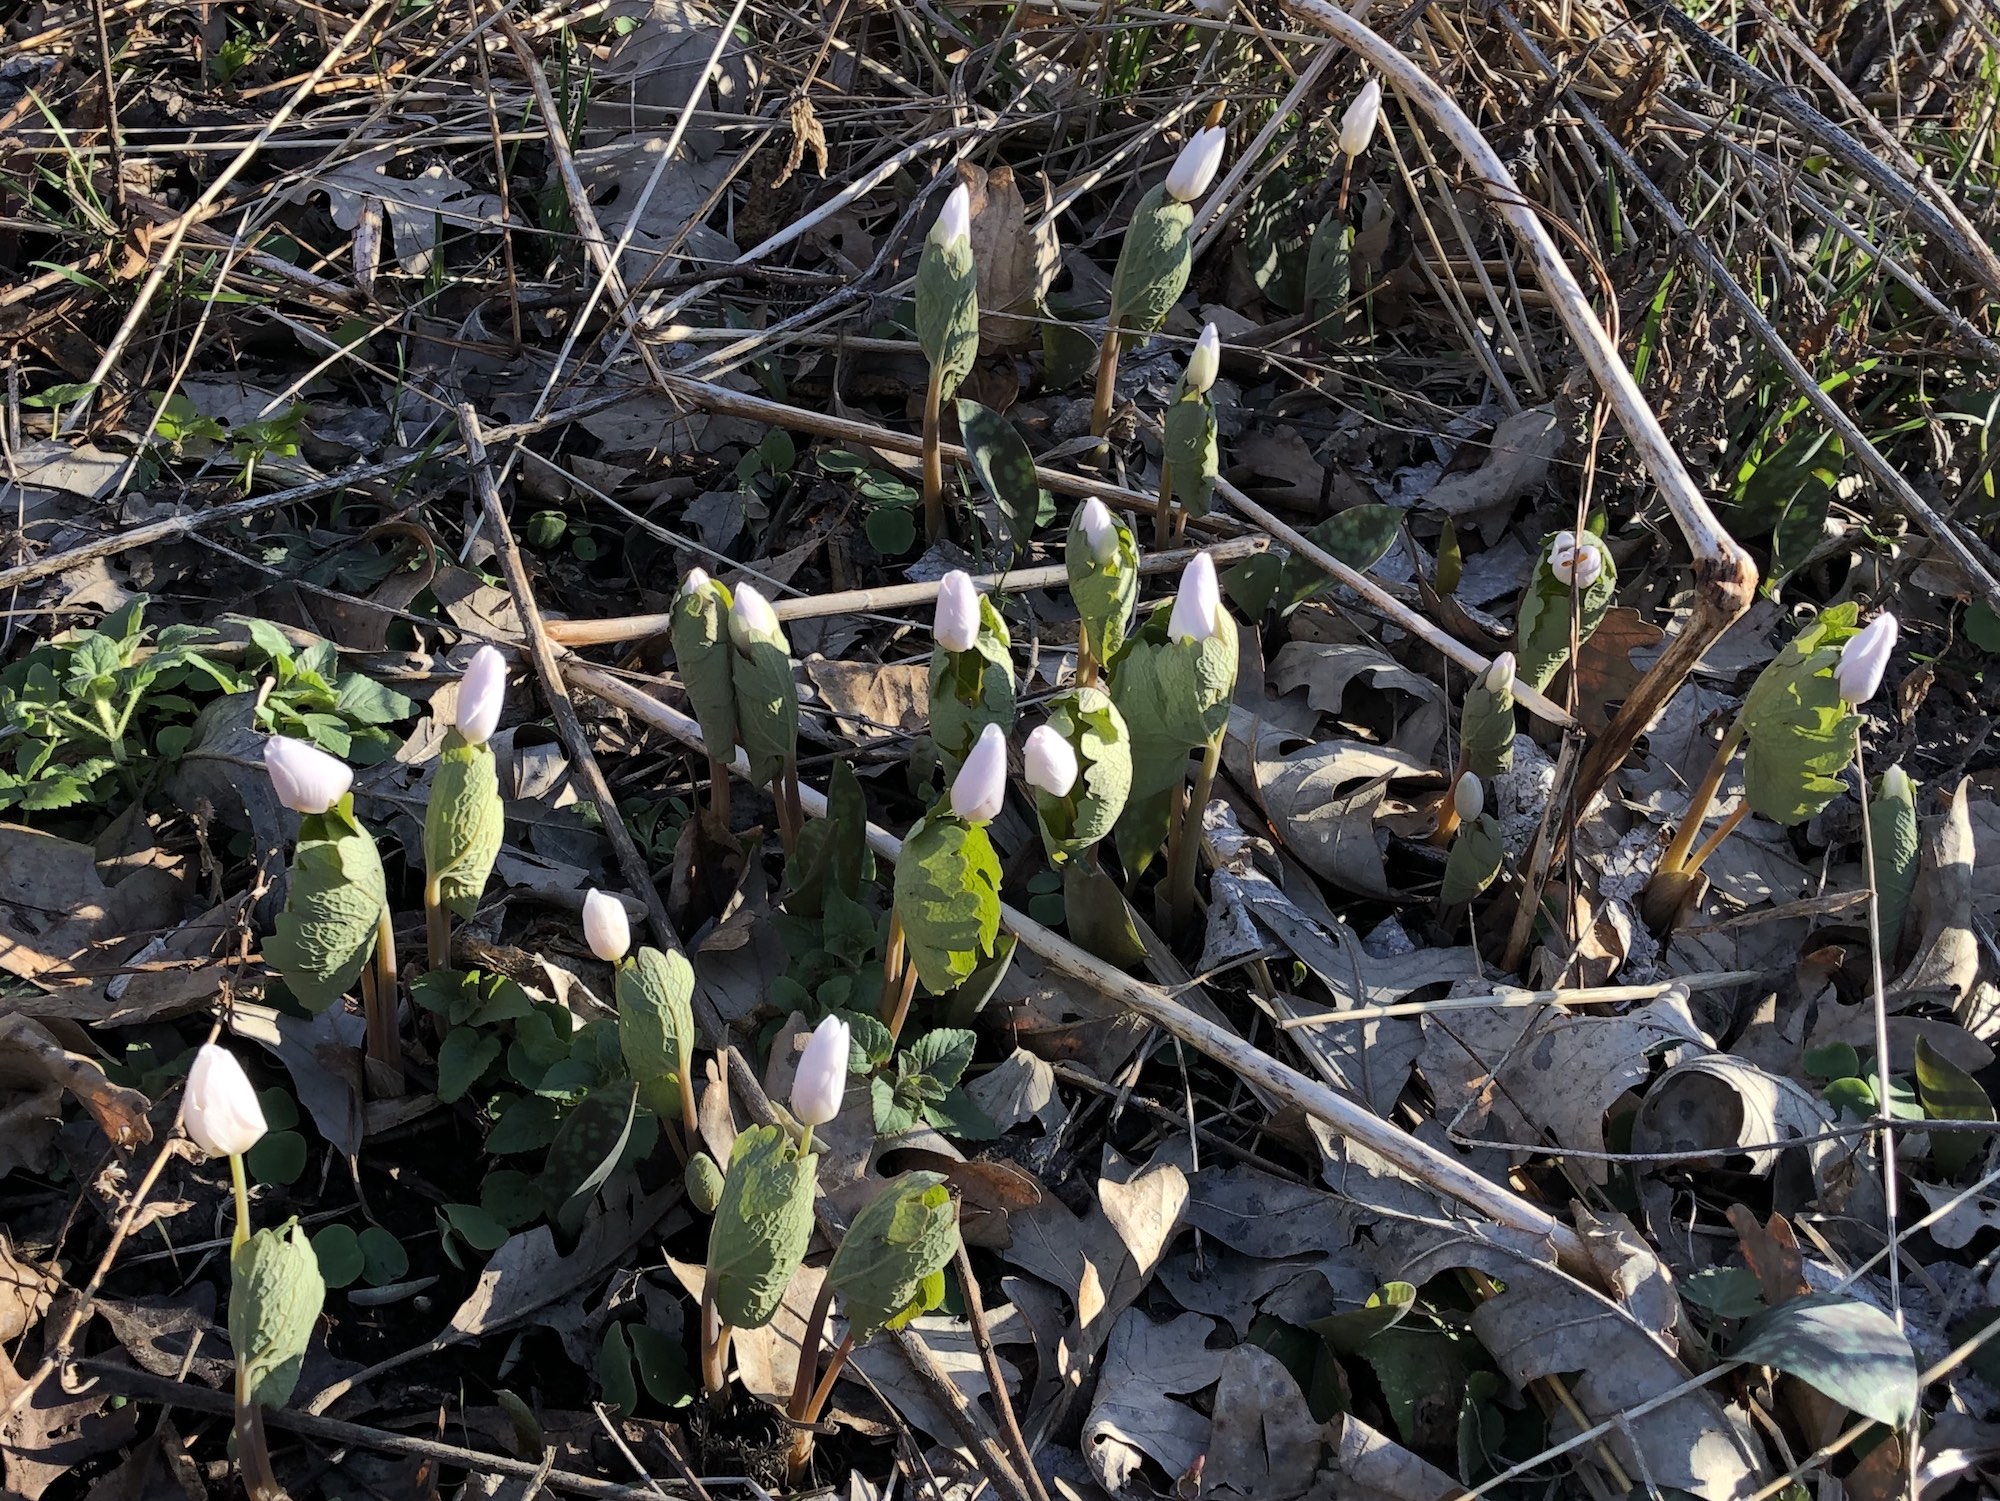 Bloodroot near Council Ring on April 13, 2019.